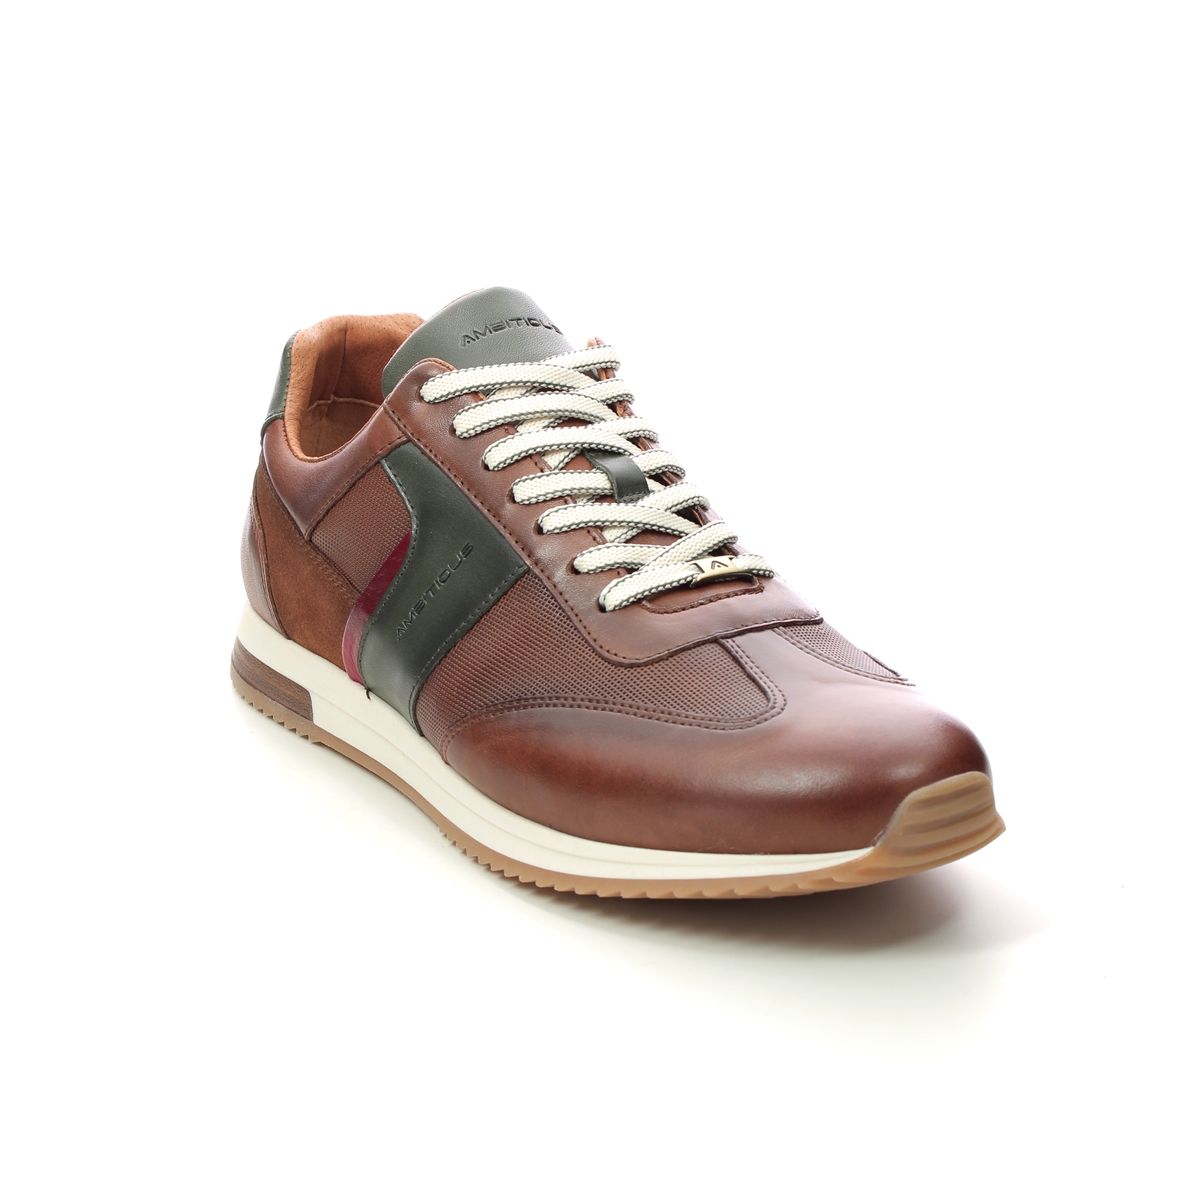 Ambitious Slow 25 11319-6584 Tan Leather comfort shoes